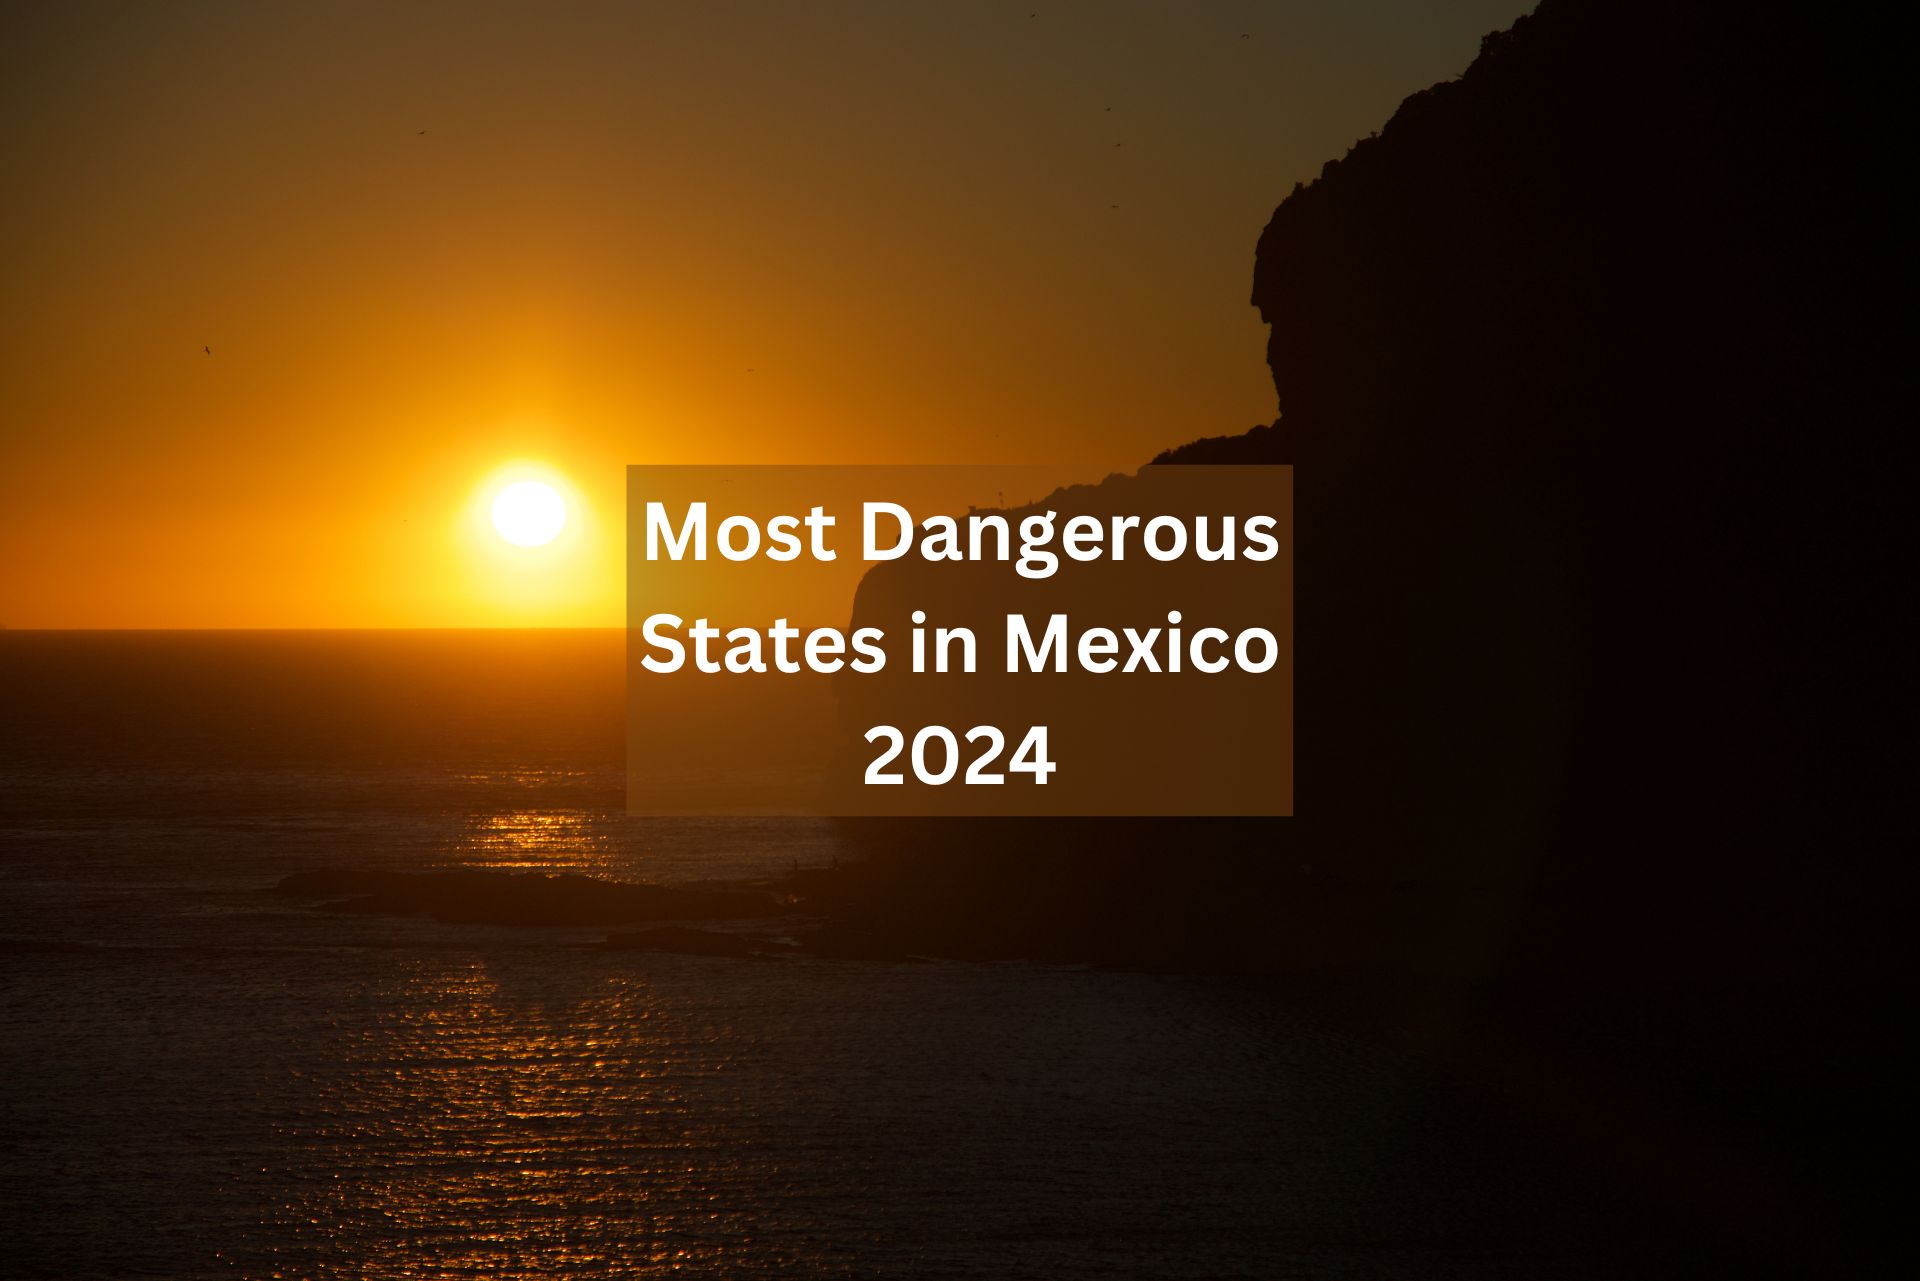 Most Dangerous States in Mexico